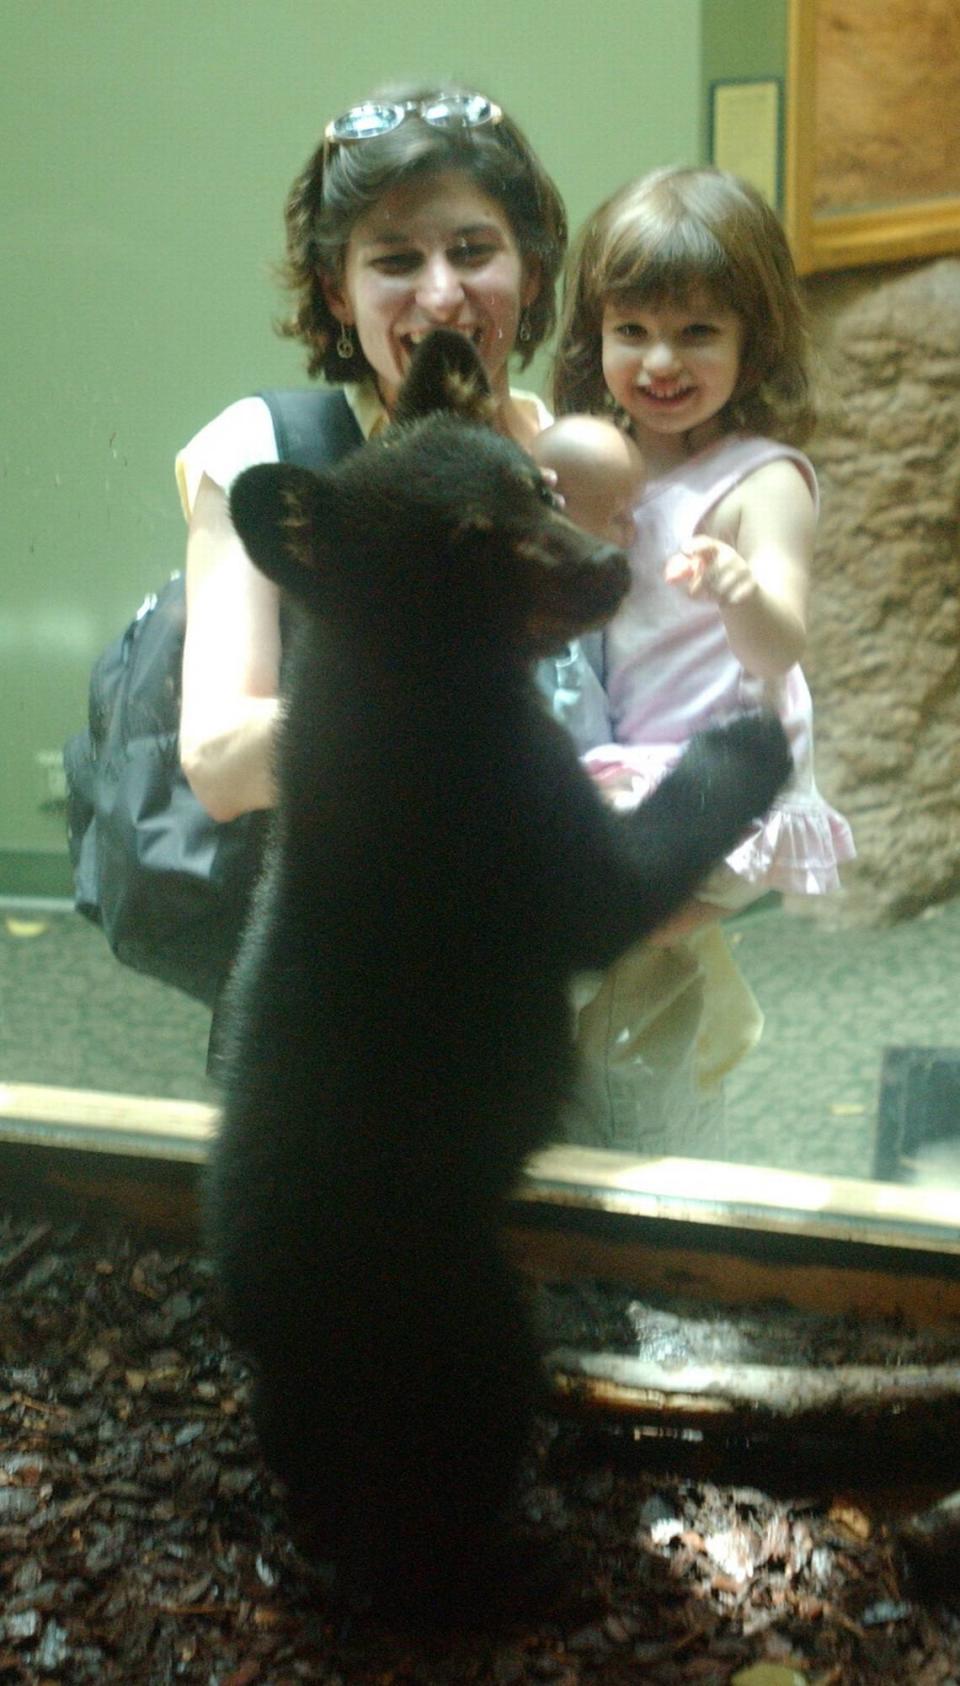 Virginia, a 20-pound, 4-month-old black bear cub met the public for the first time June 13, 2005, at the Museum of Life & Science in Durham, North Carolina. The museum held an online contest to name the bear cub.